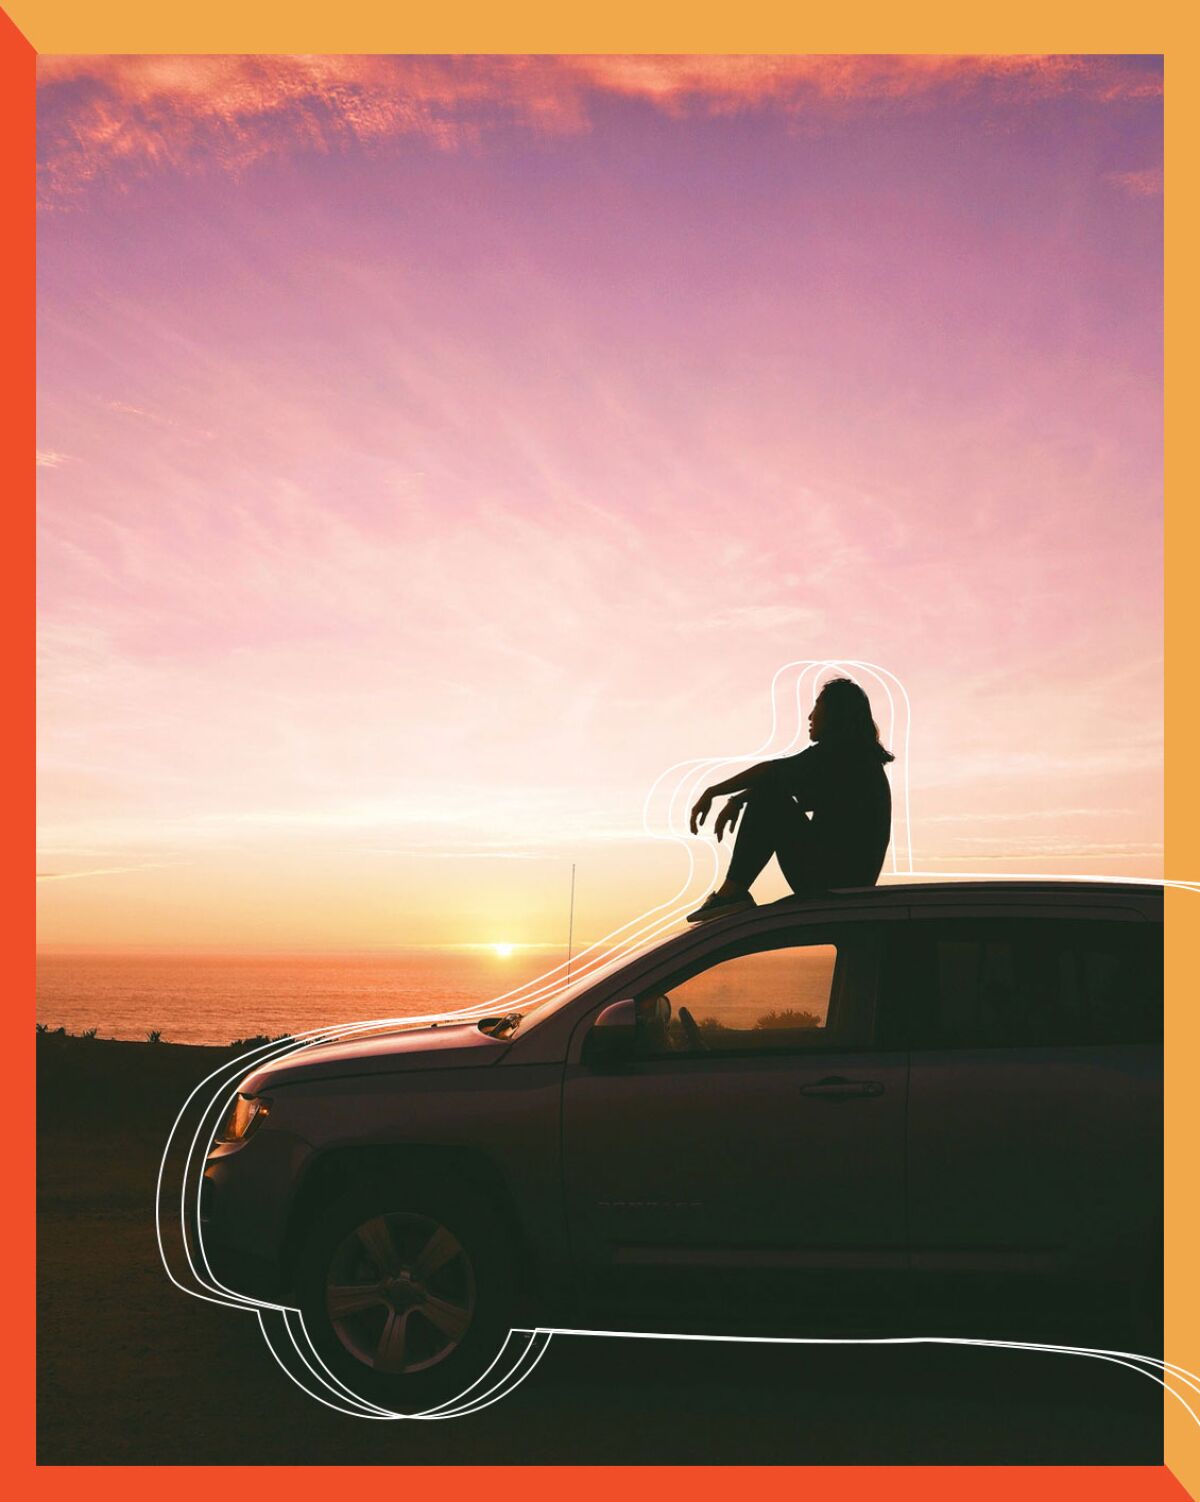 An illustrated photo of a person sitting on the top of a vehicle